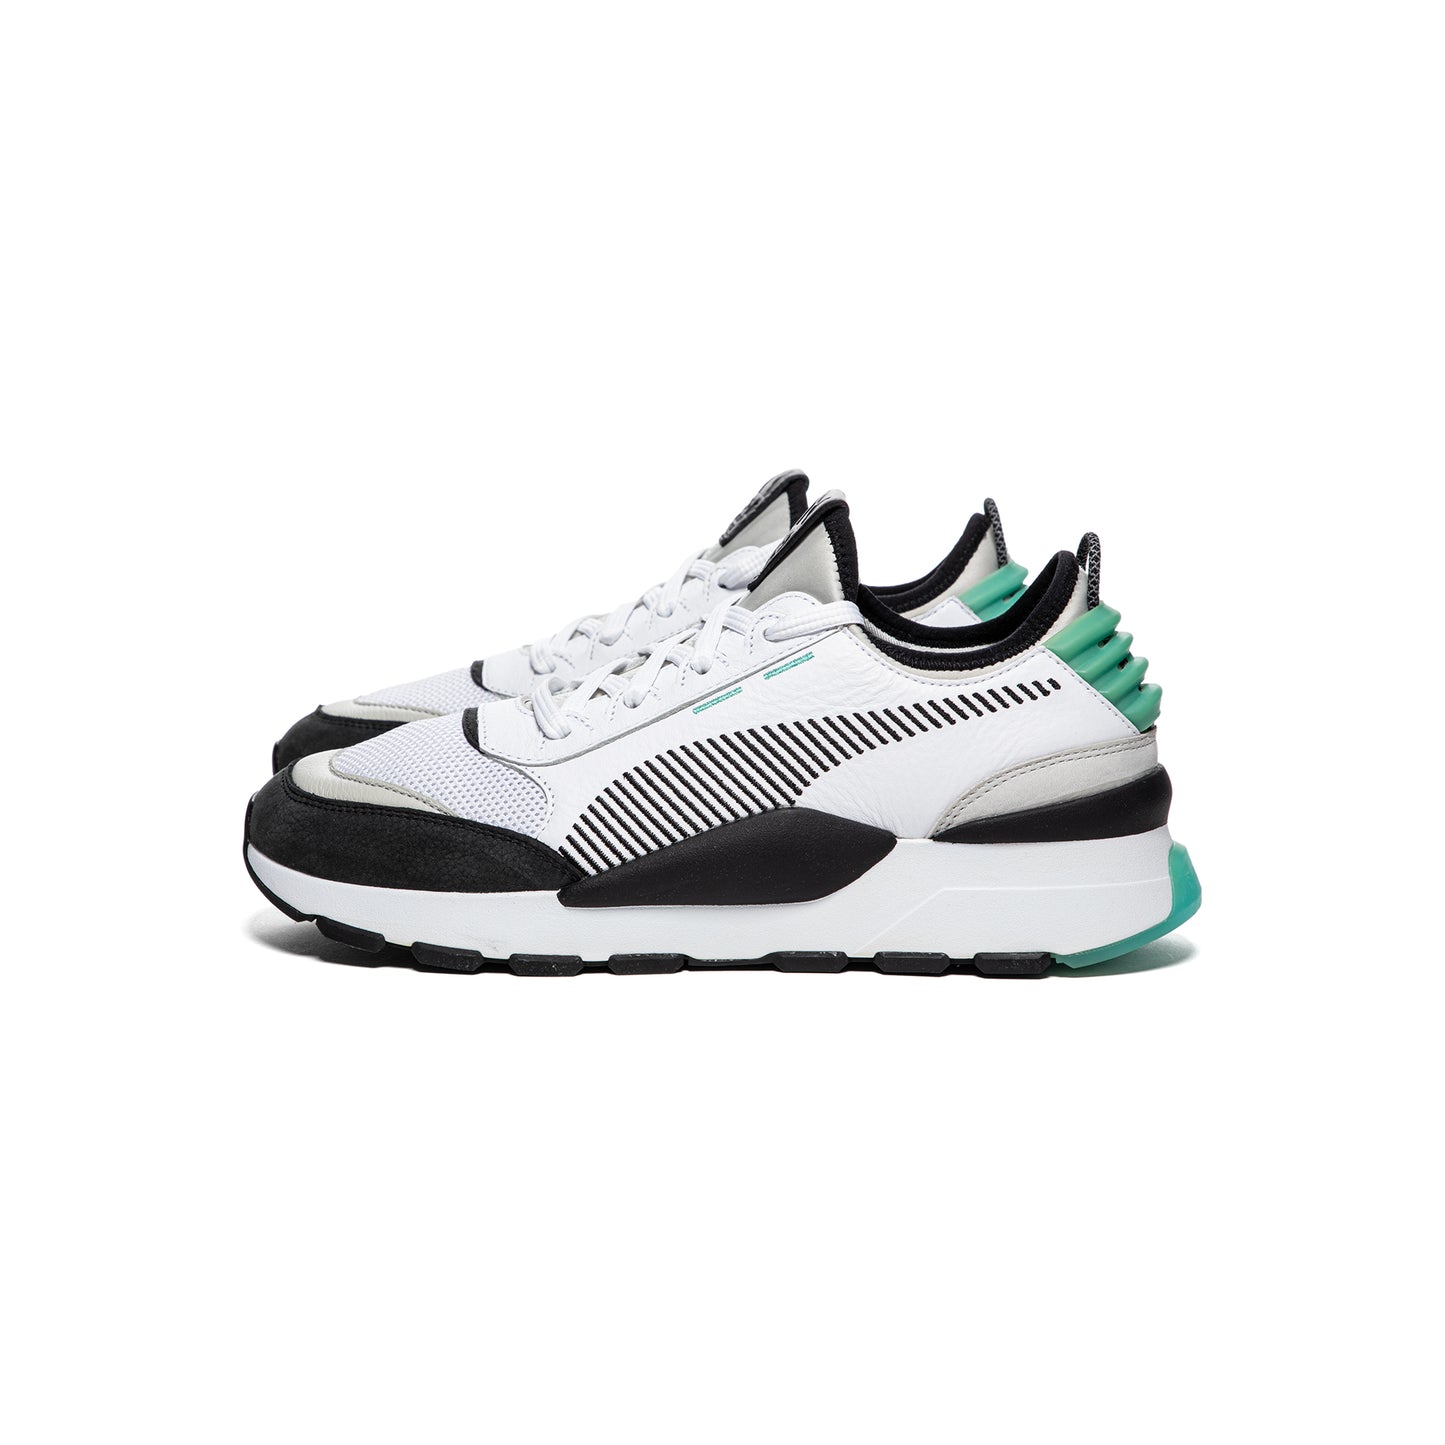 Puma RS-0 Re-Invention (Puma White/Gray Violet/Biscay Green)